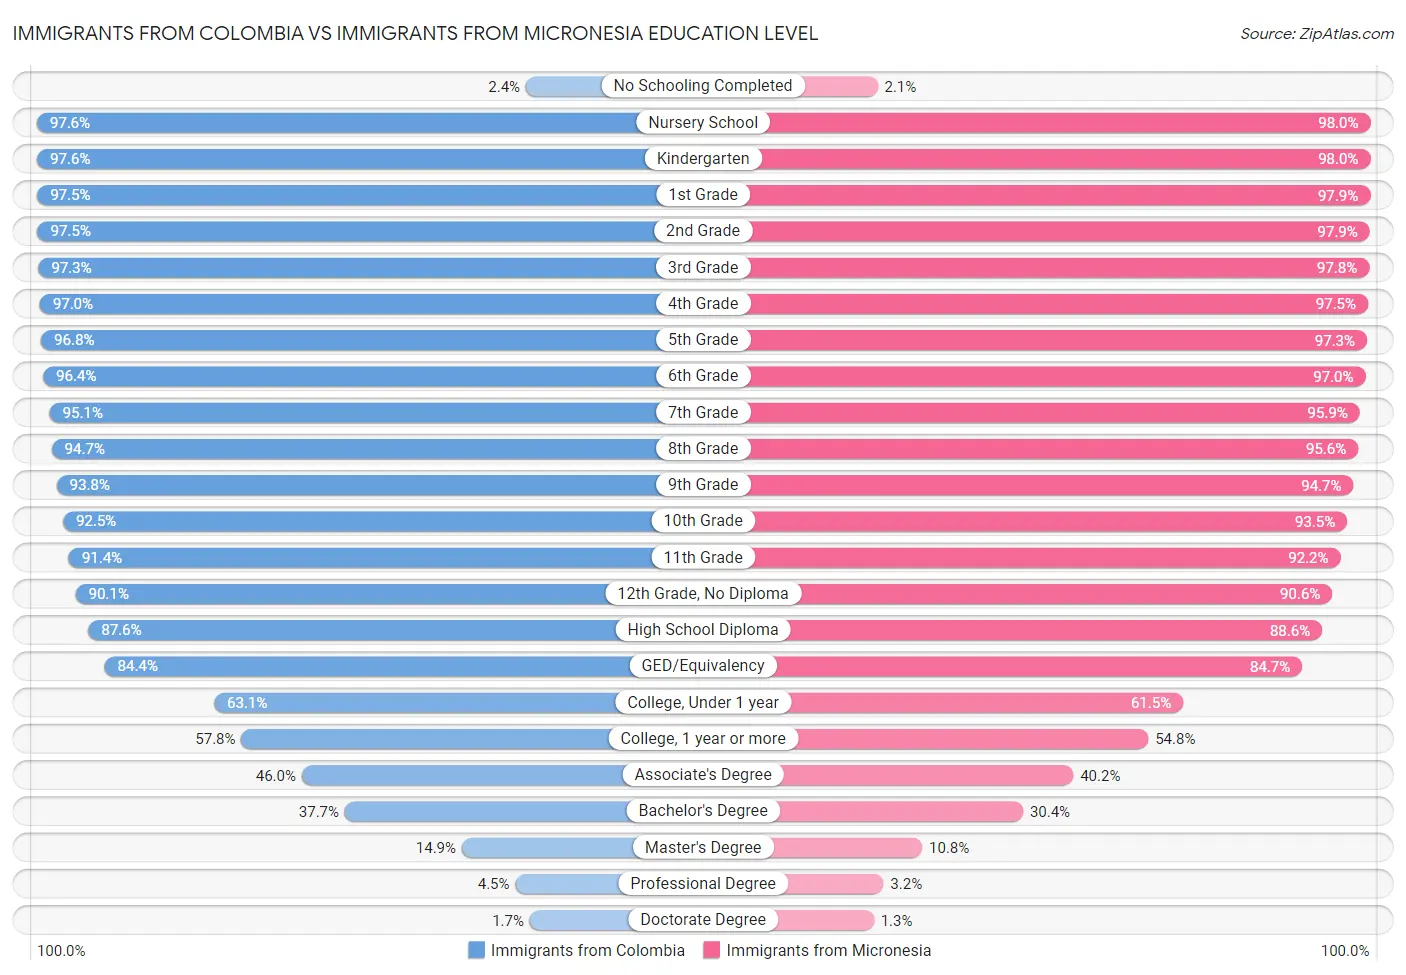 Immigrants from Colombia vs Immigrants from Micronesia Education Level